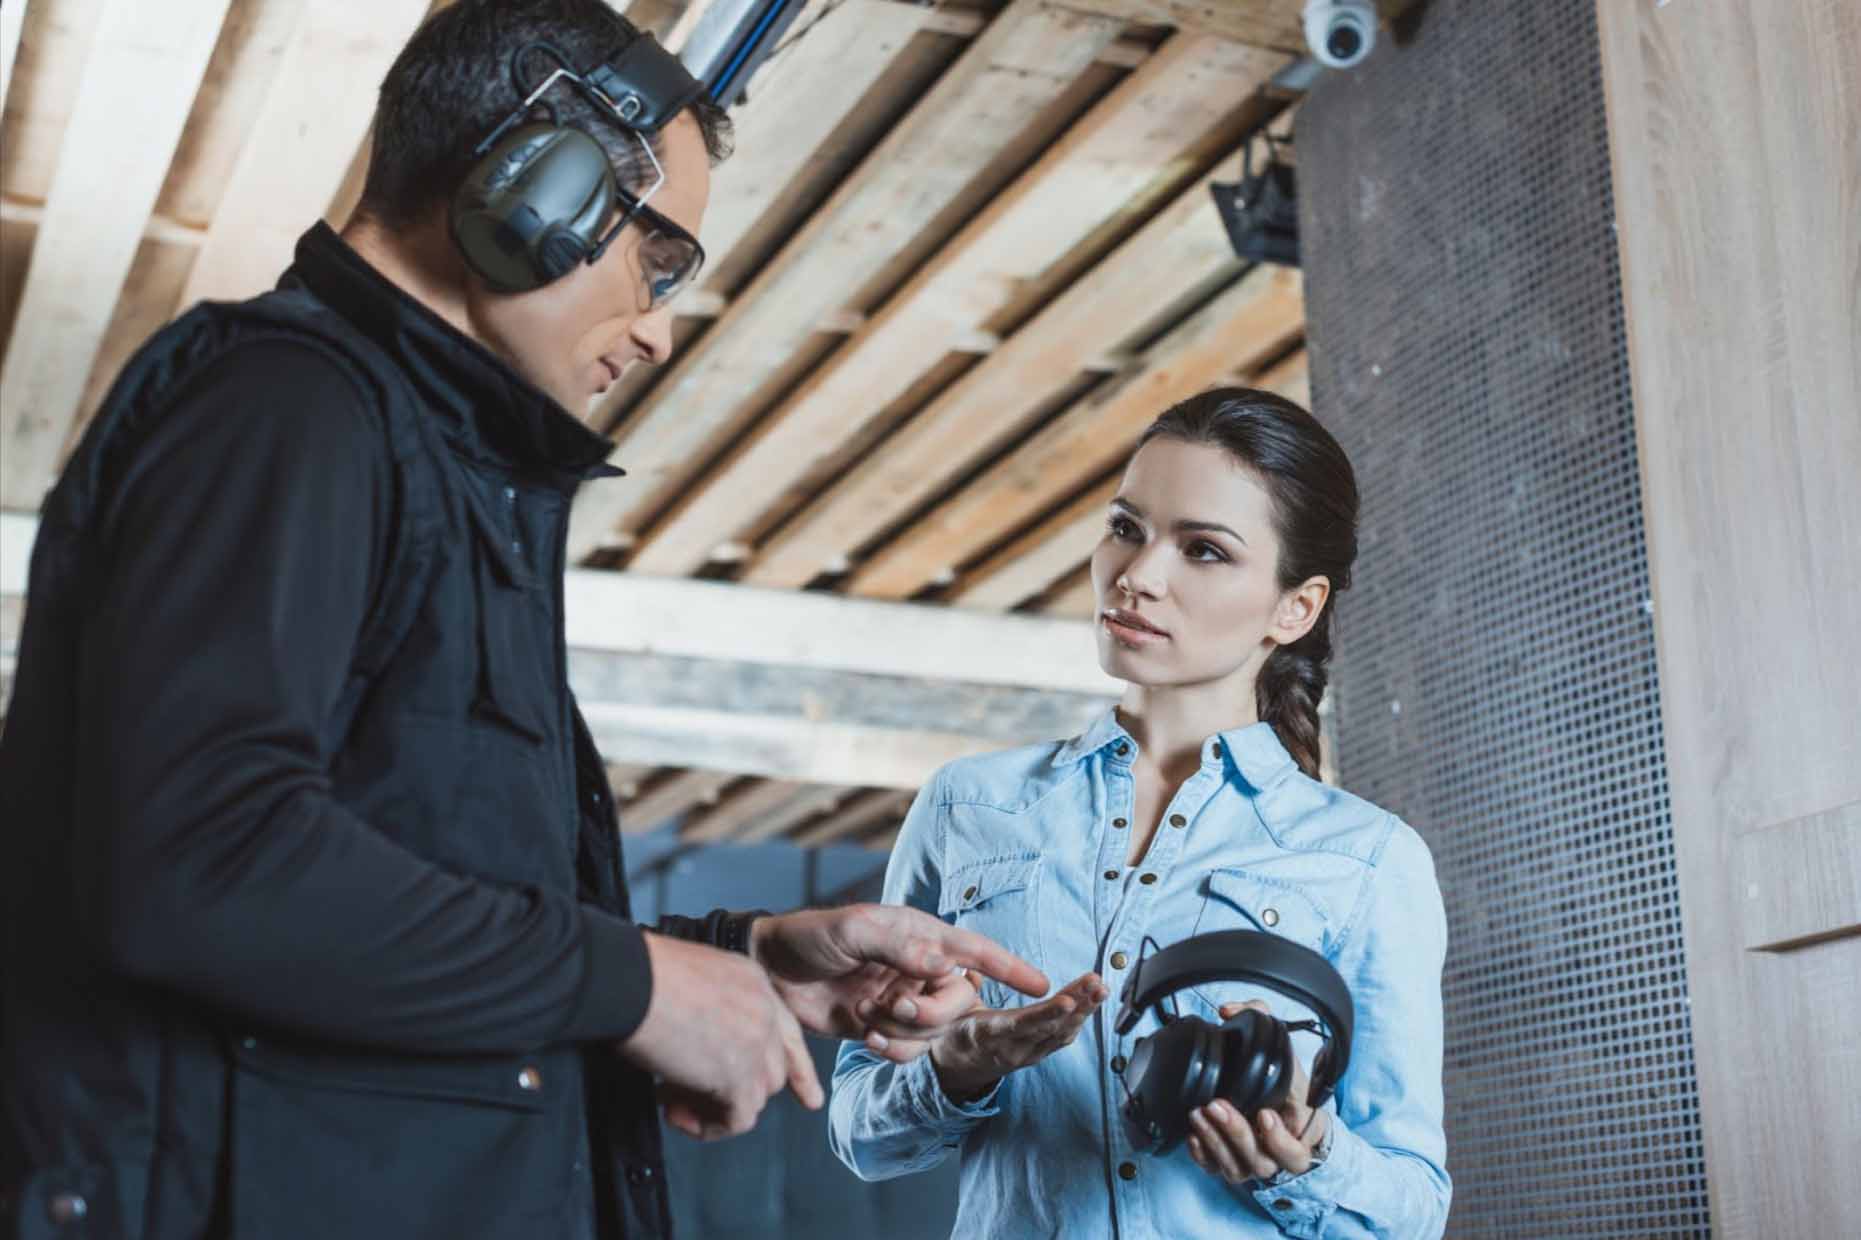 Woman holding headphones next to a male instructor while at a gun range.